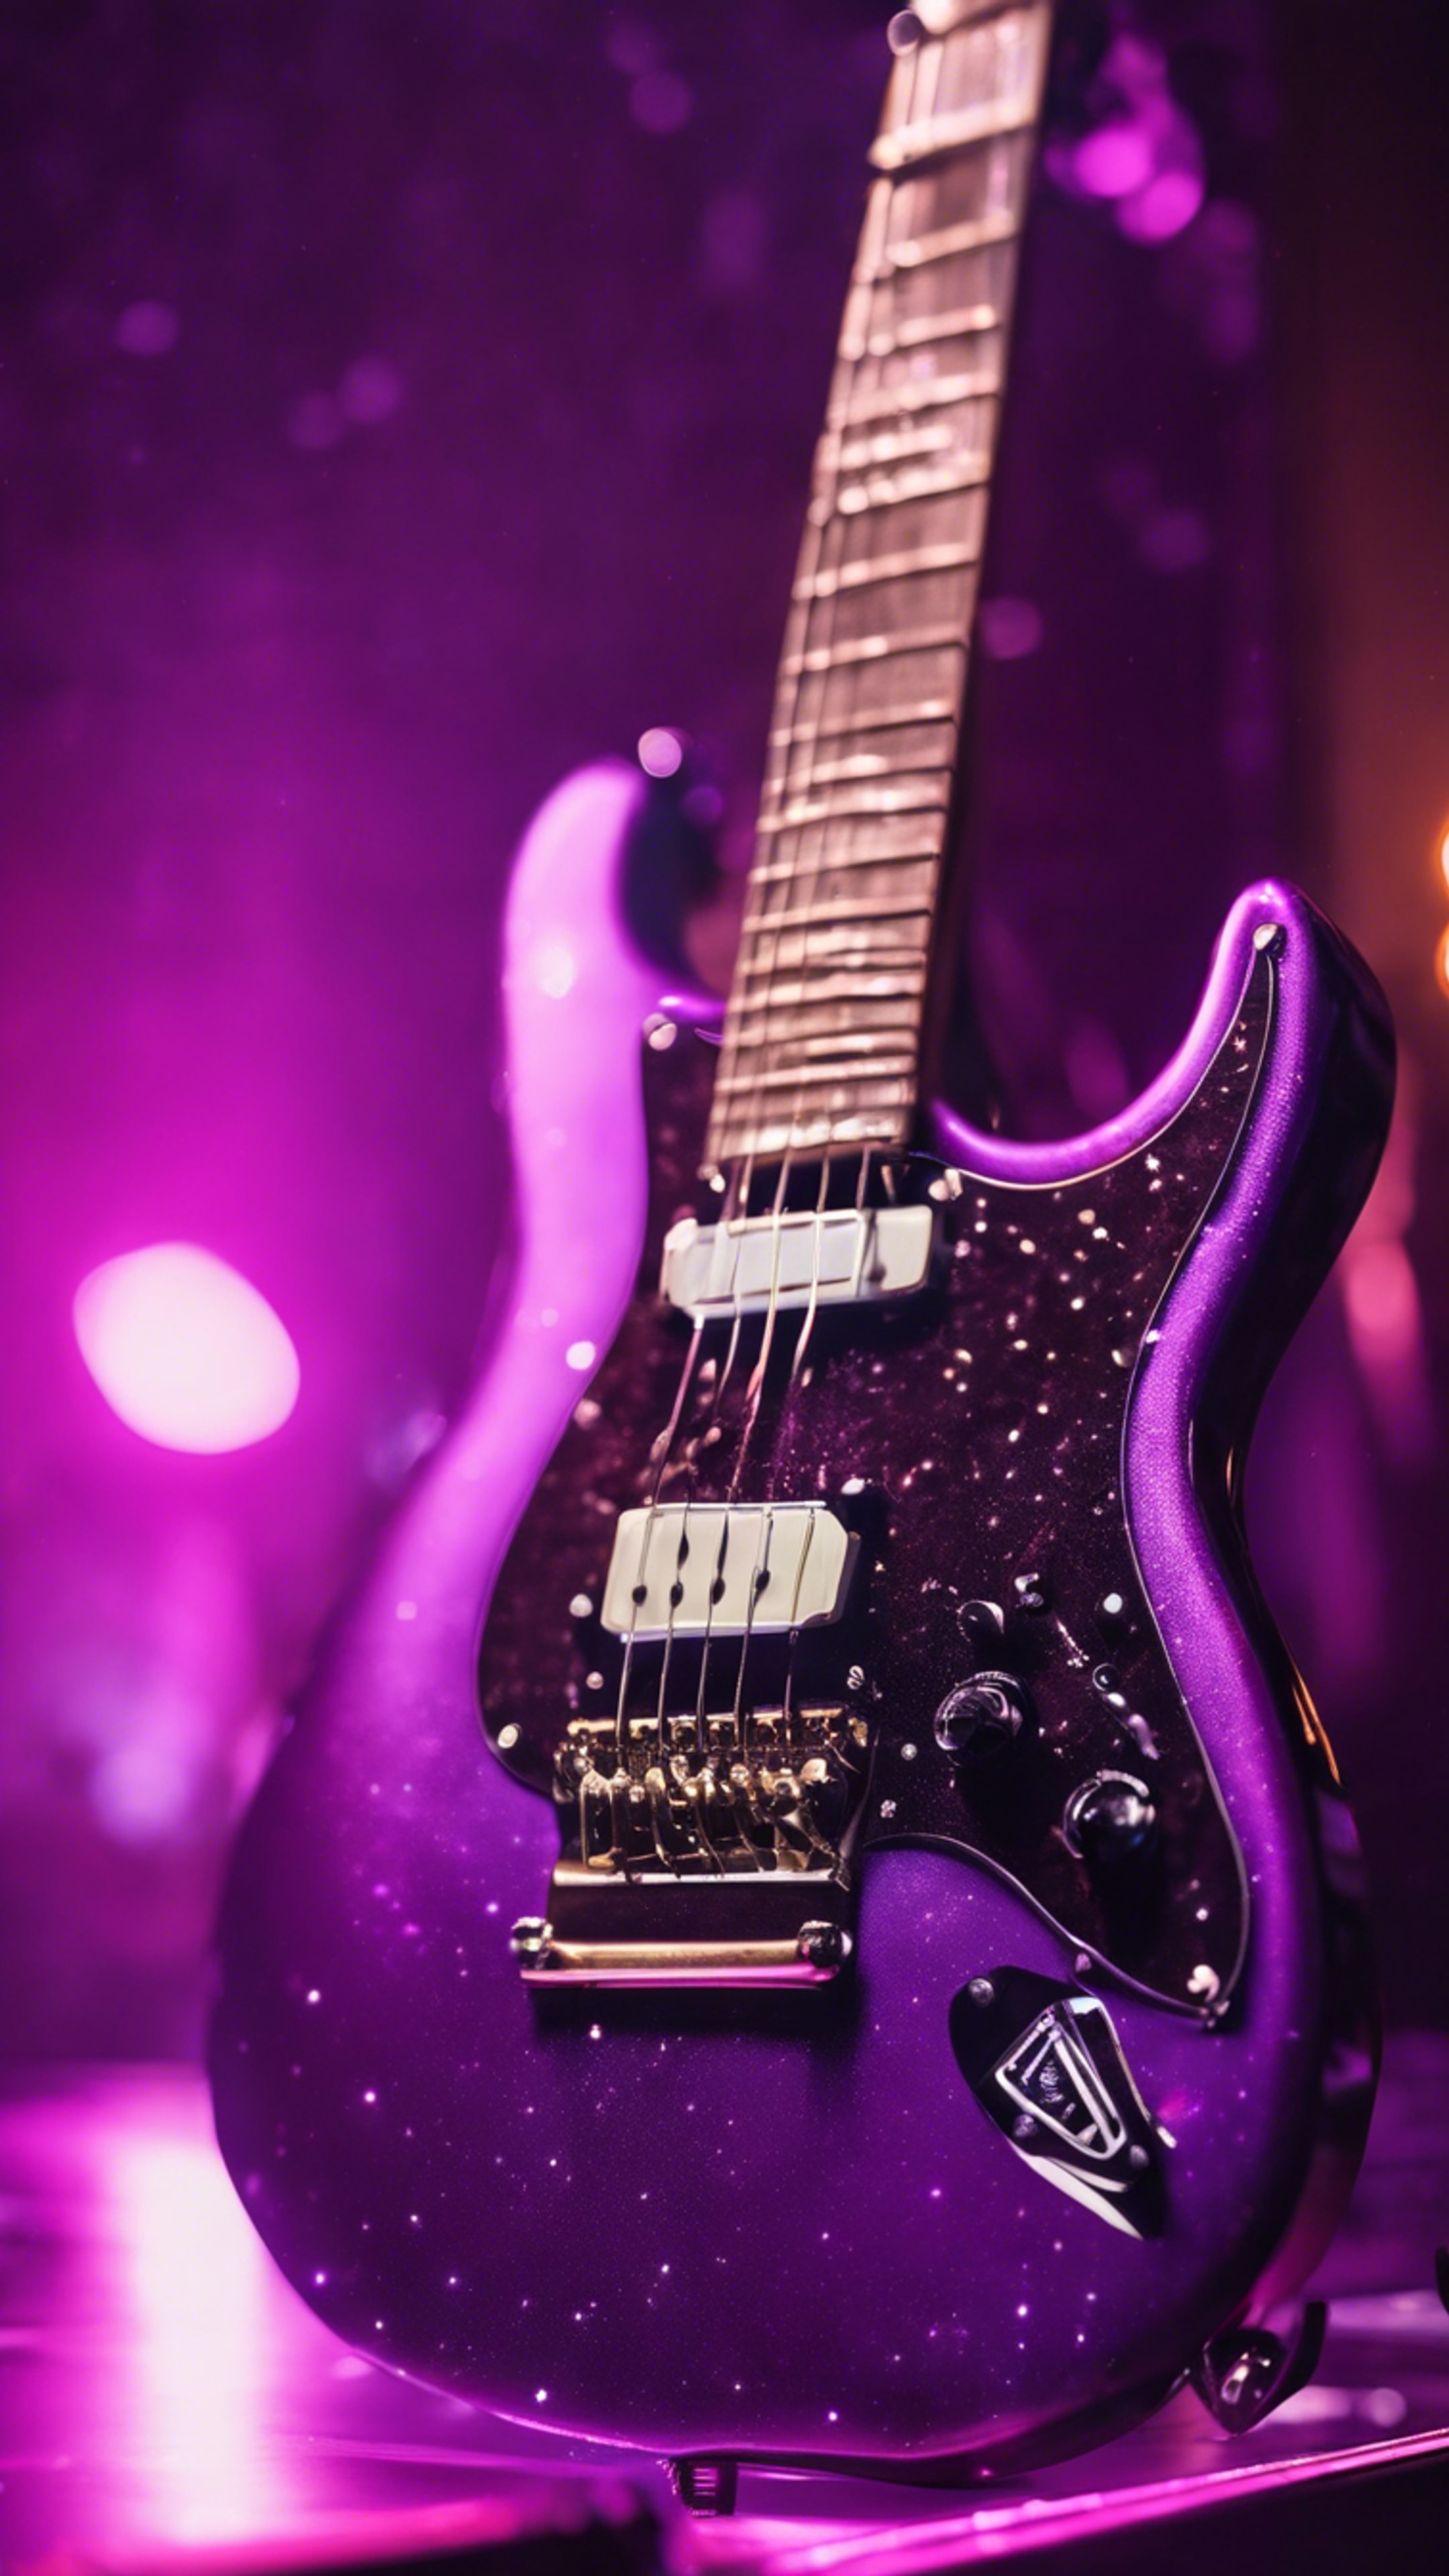 An electric guitar, finished in a glossy neon purple, under the cool stage lights of a concert. Шпалери[e32ffa723fc740a5910d]